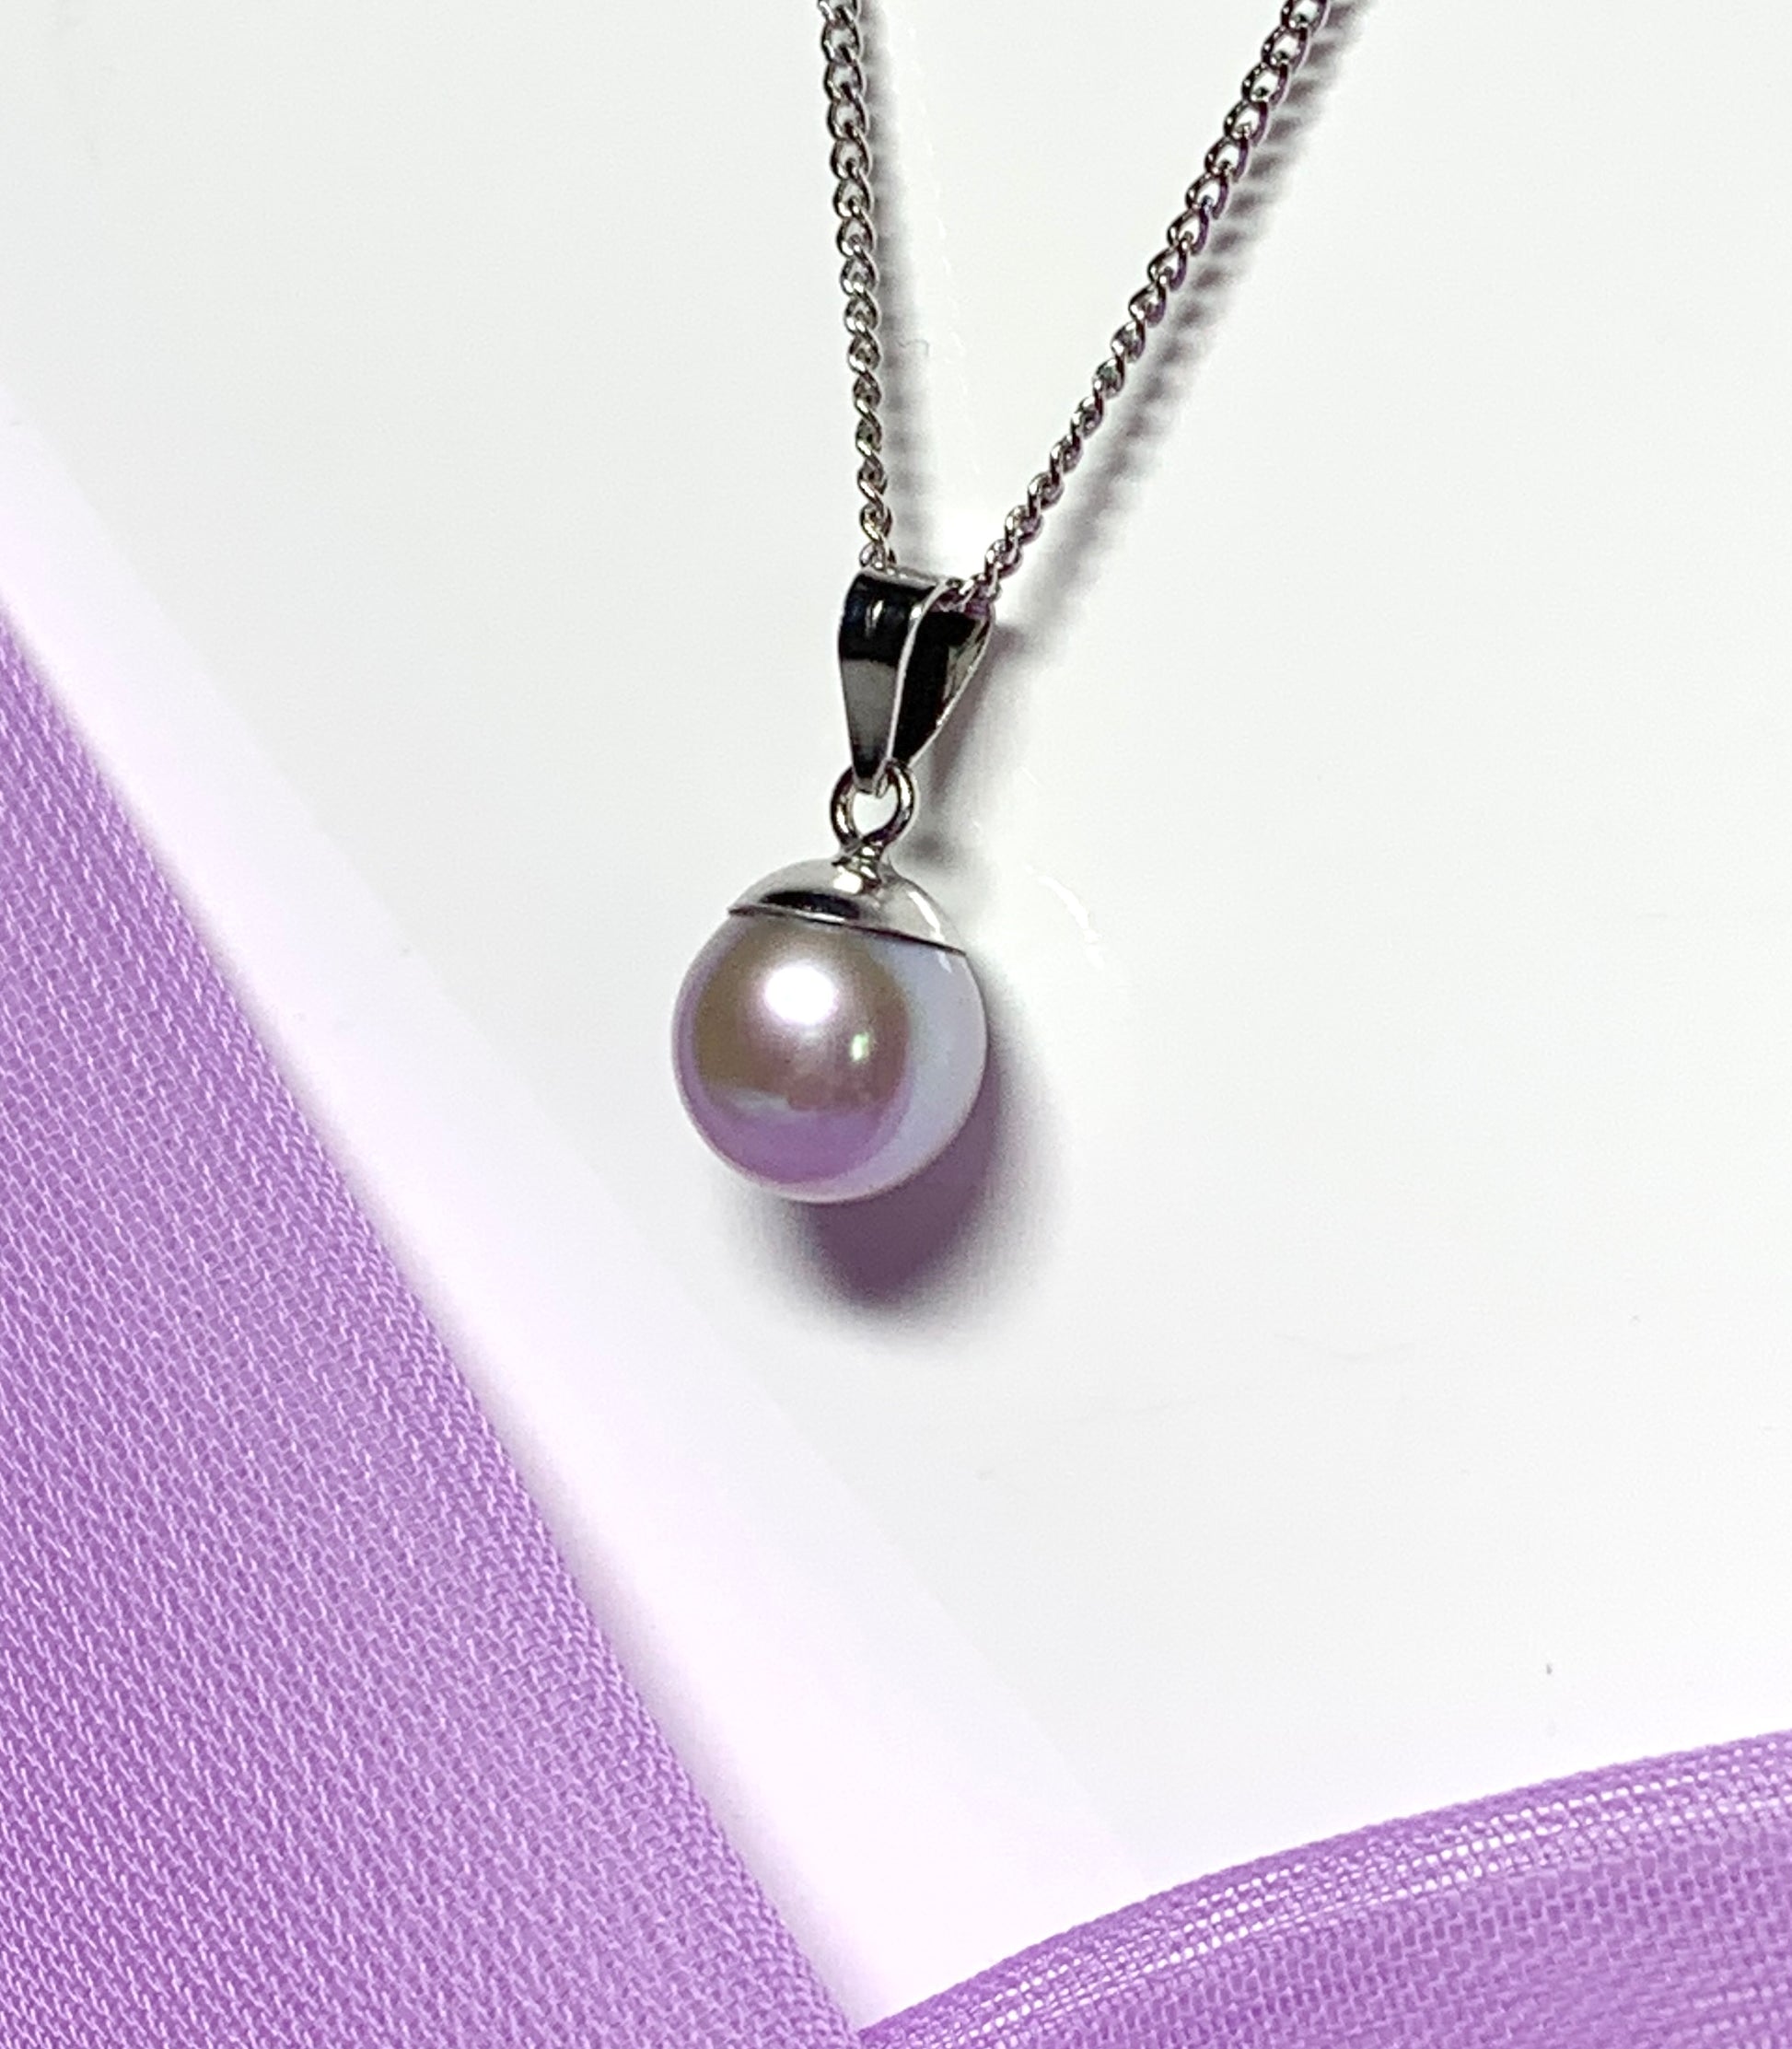 White gold round light grey freshwater cultured pearl necklace pendant